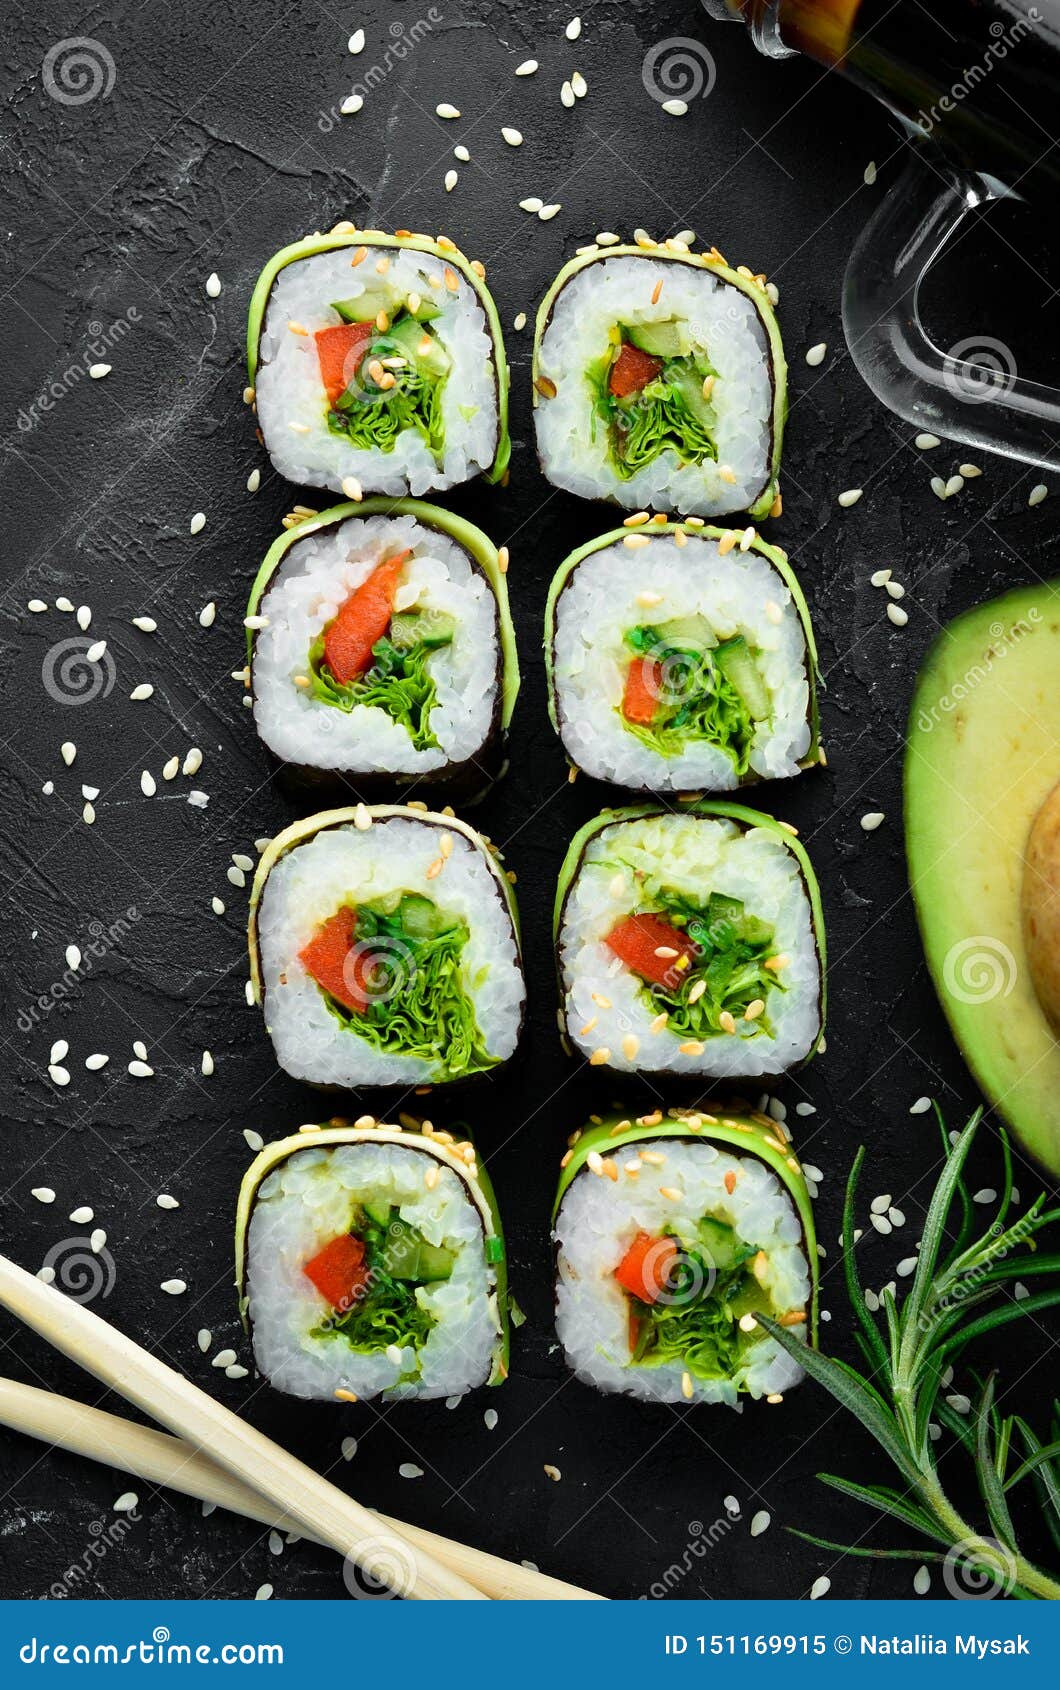 Sushi Roll With Avocado, Cucumber And Tomato. Japanese Cuisine. Stock